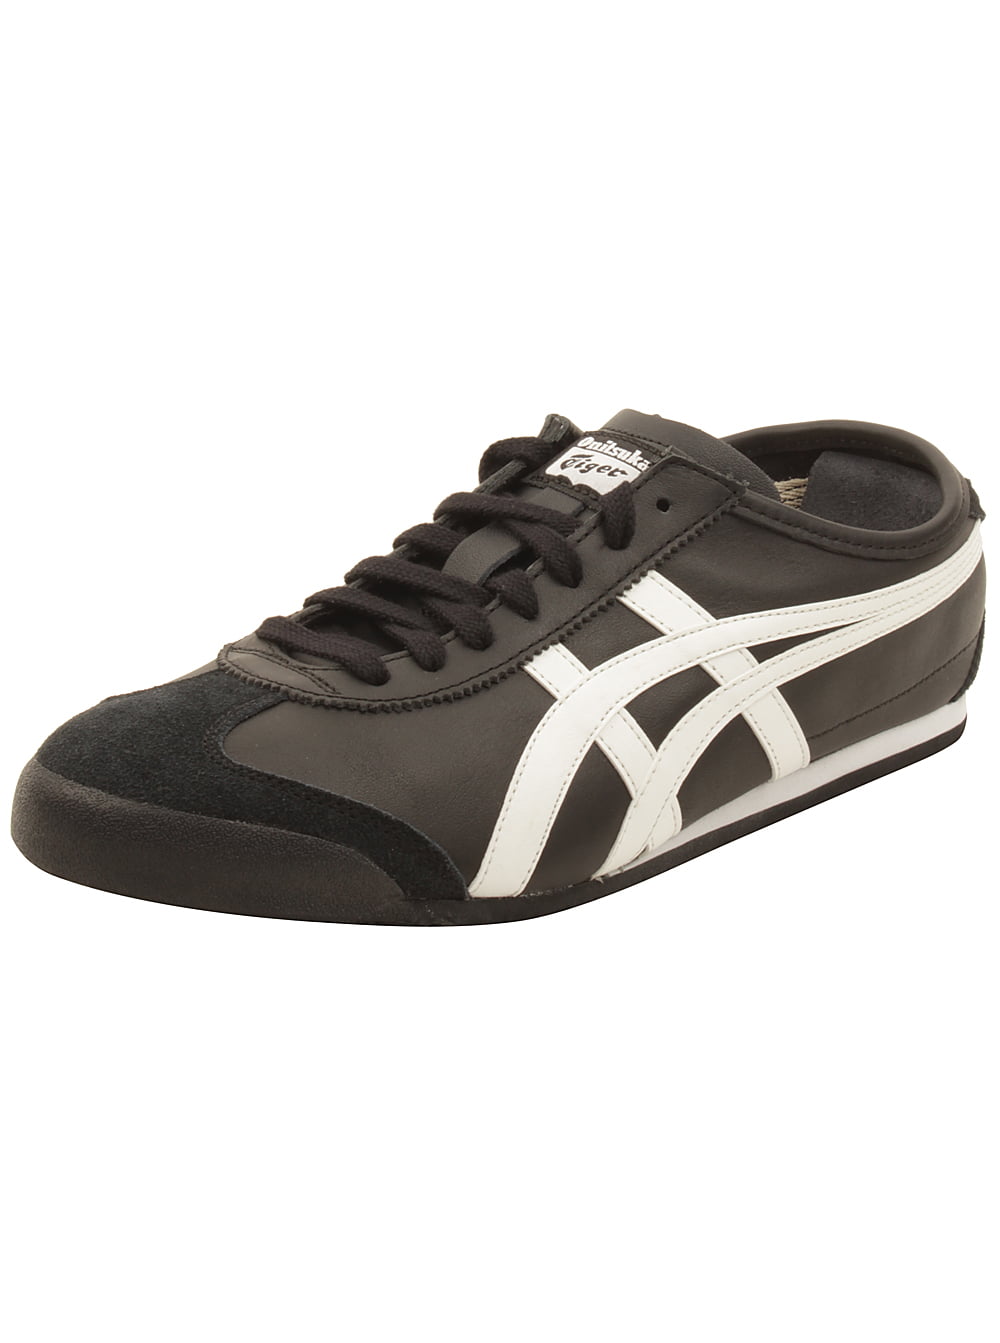 Buy Onitsuka Tiger Unisex Mexico 66 Shoes D4J2L, Black/Gold Fusion, 9.5 M  US at Amazon.in